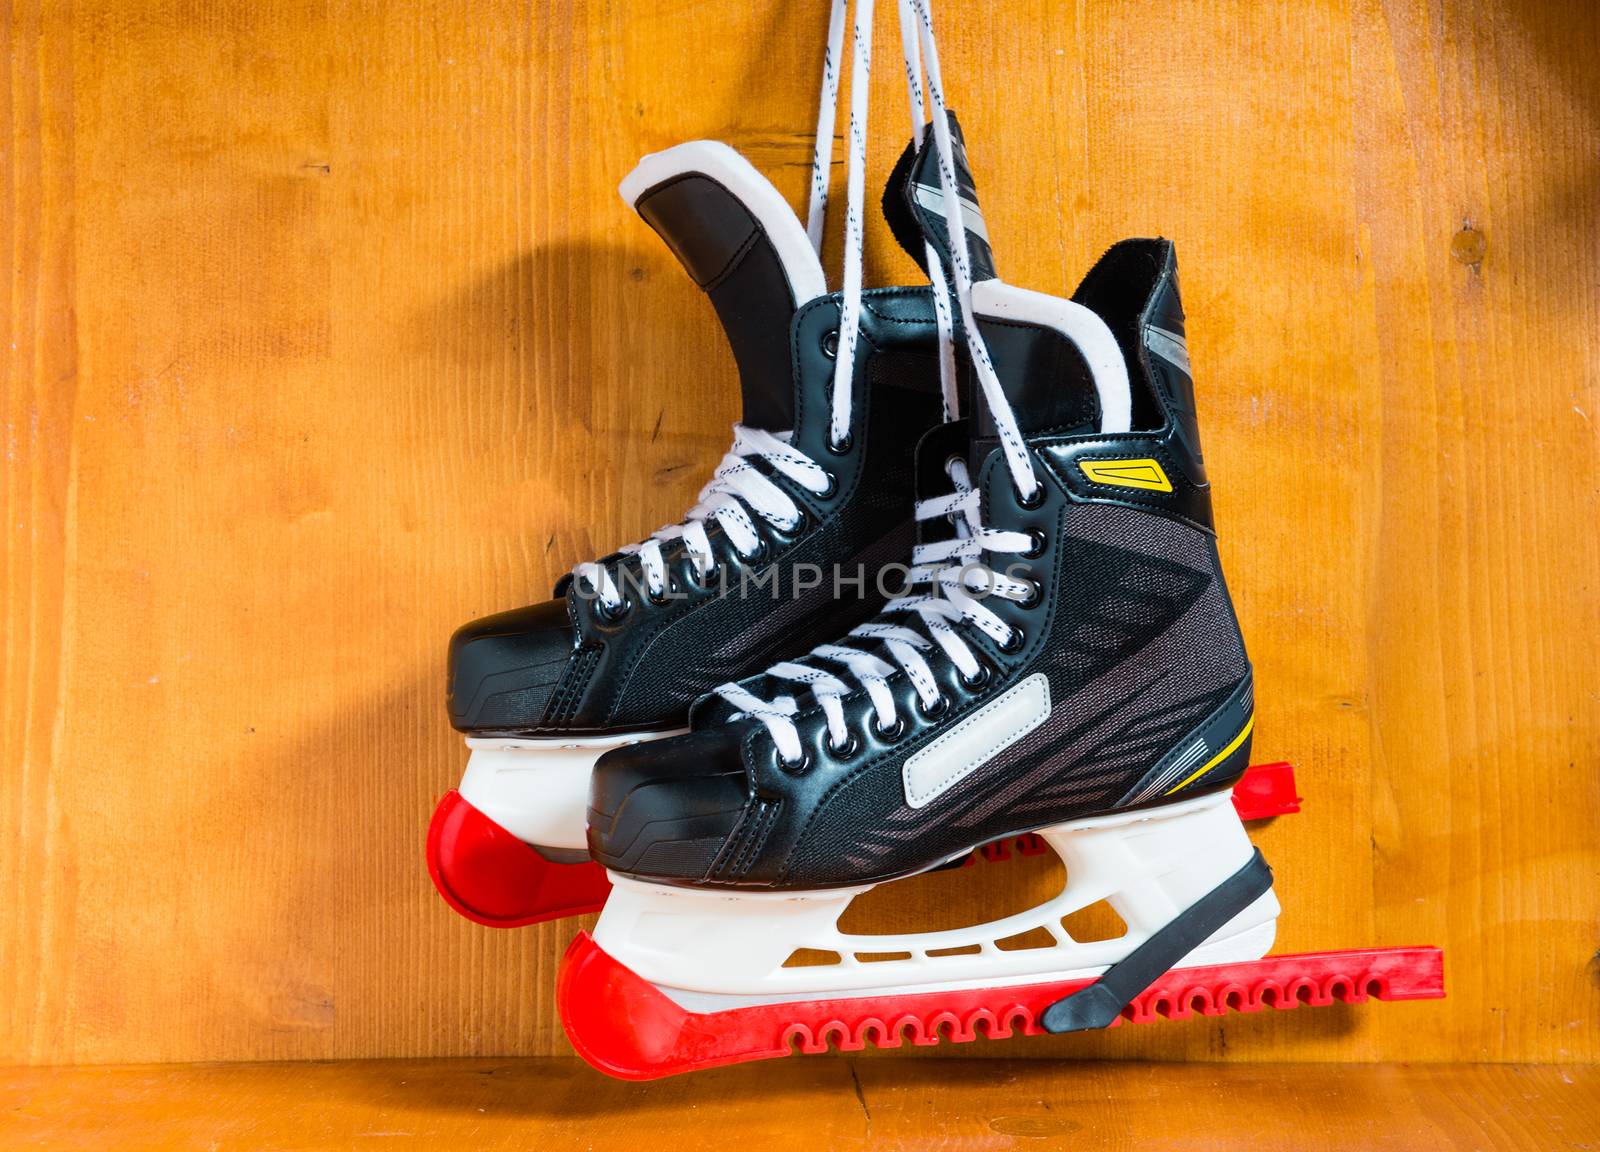 hockey skates with protective covers covers by ben44